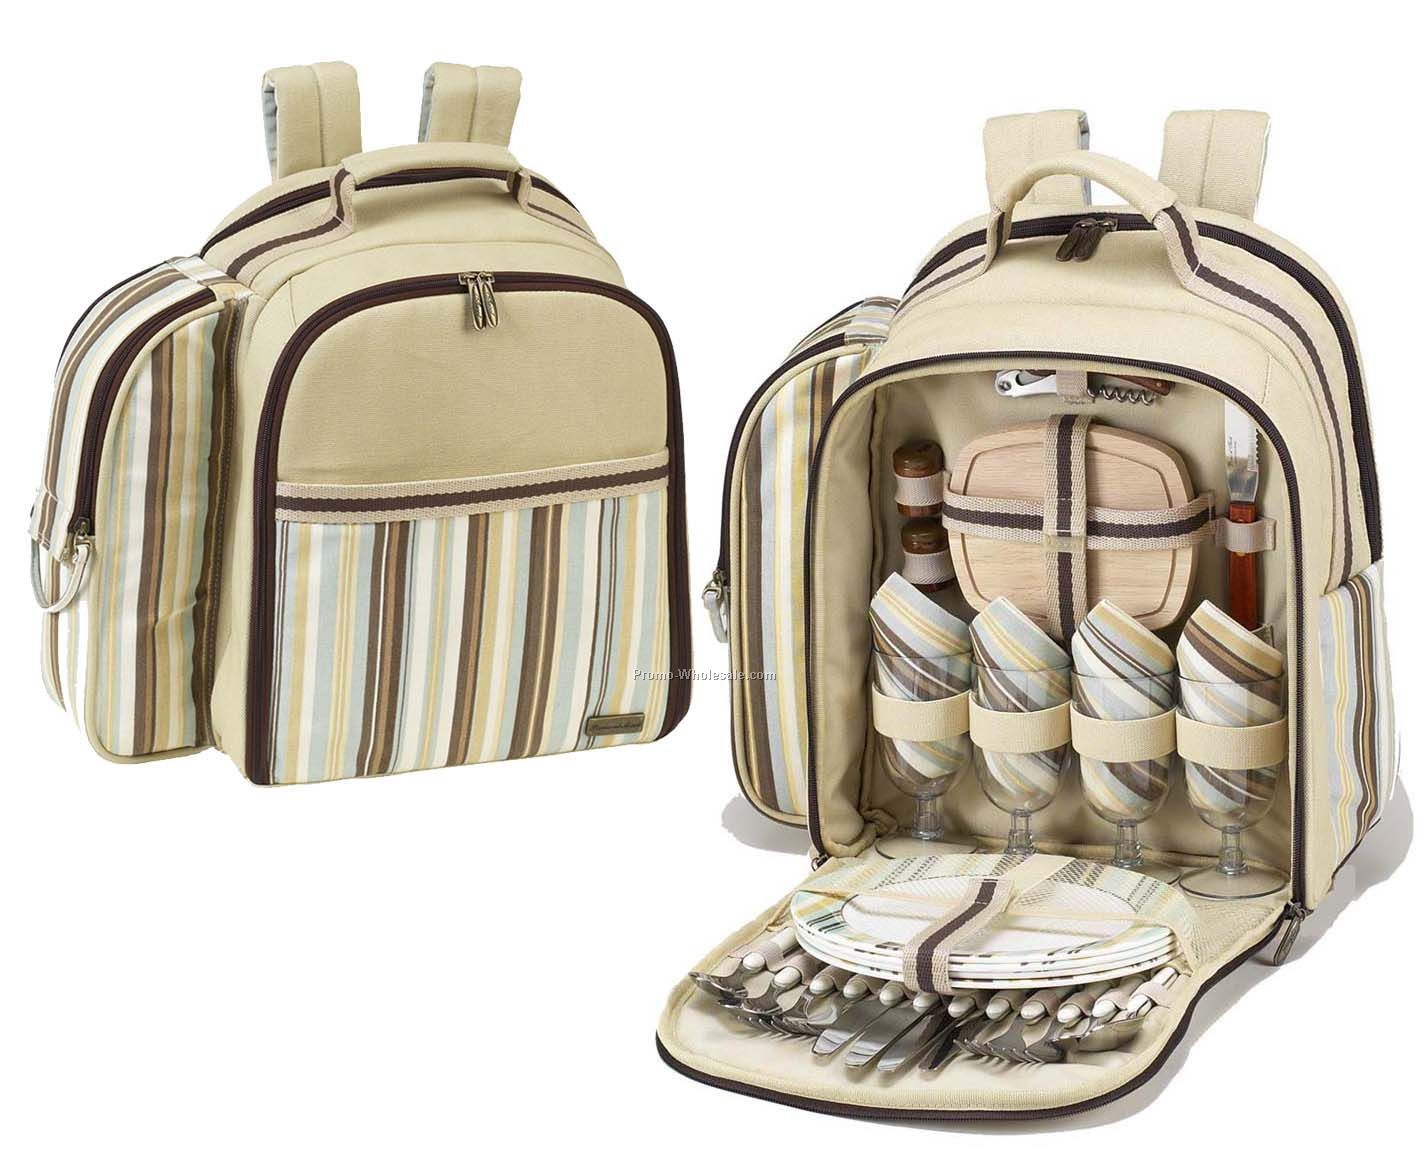 15-1/2"x16"x7" Picnic Backpack Cooler For 4 People